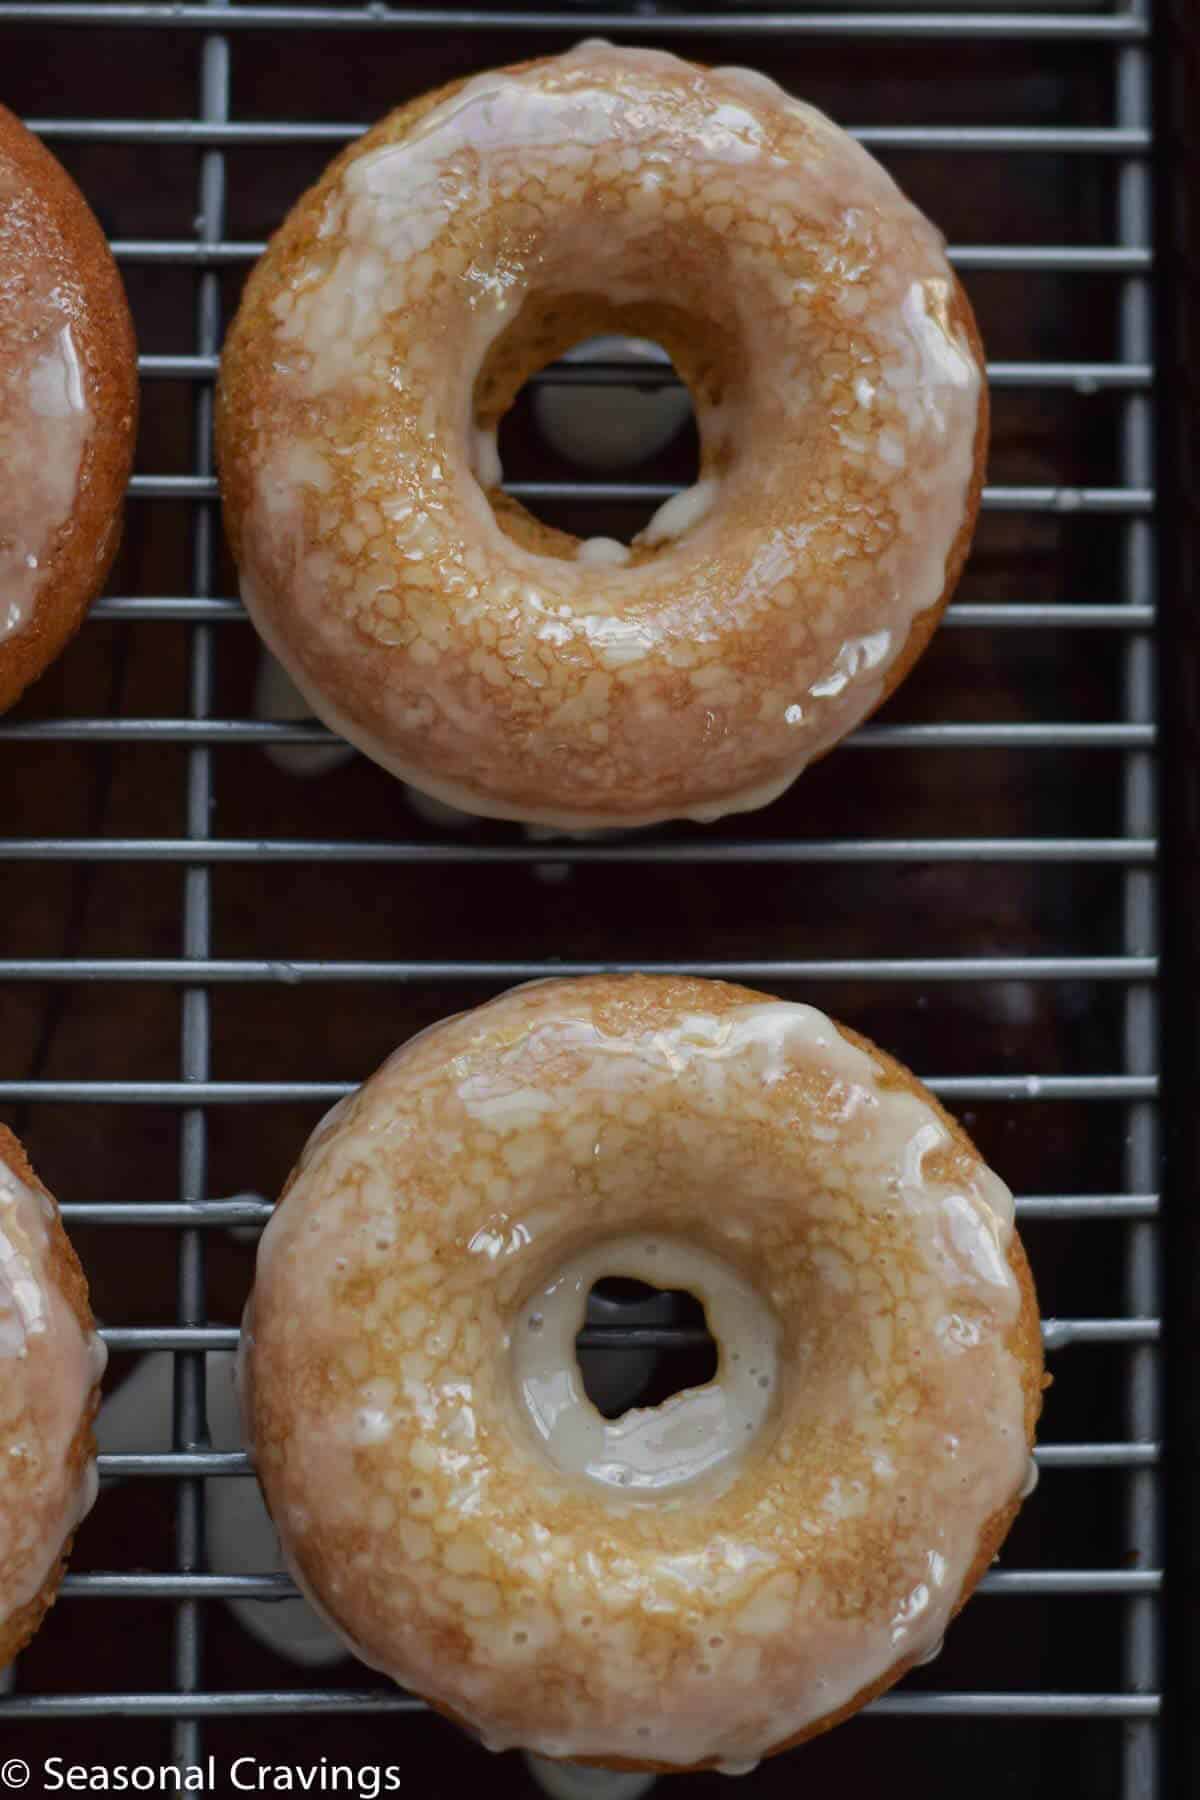  Gluten Free Apple Cider Doughnuts on a cooling rack with a sweet glaze